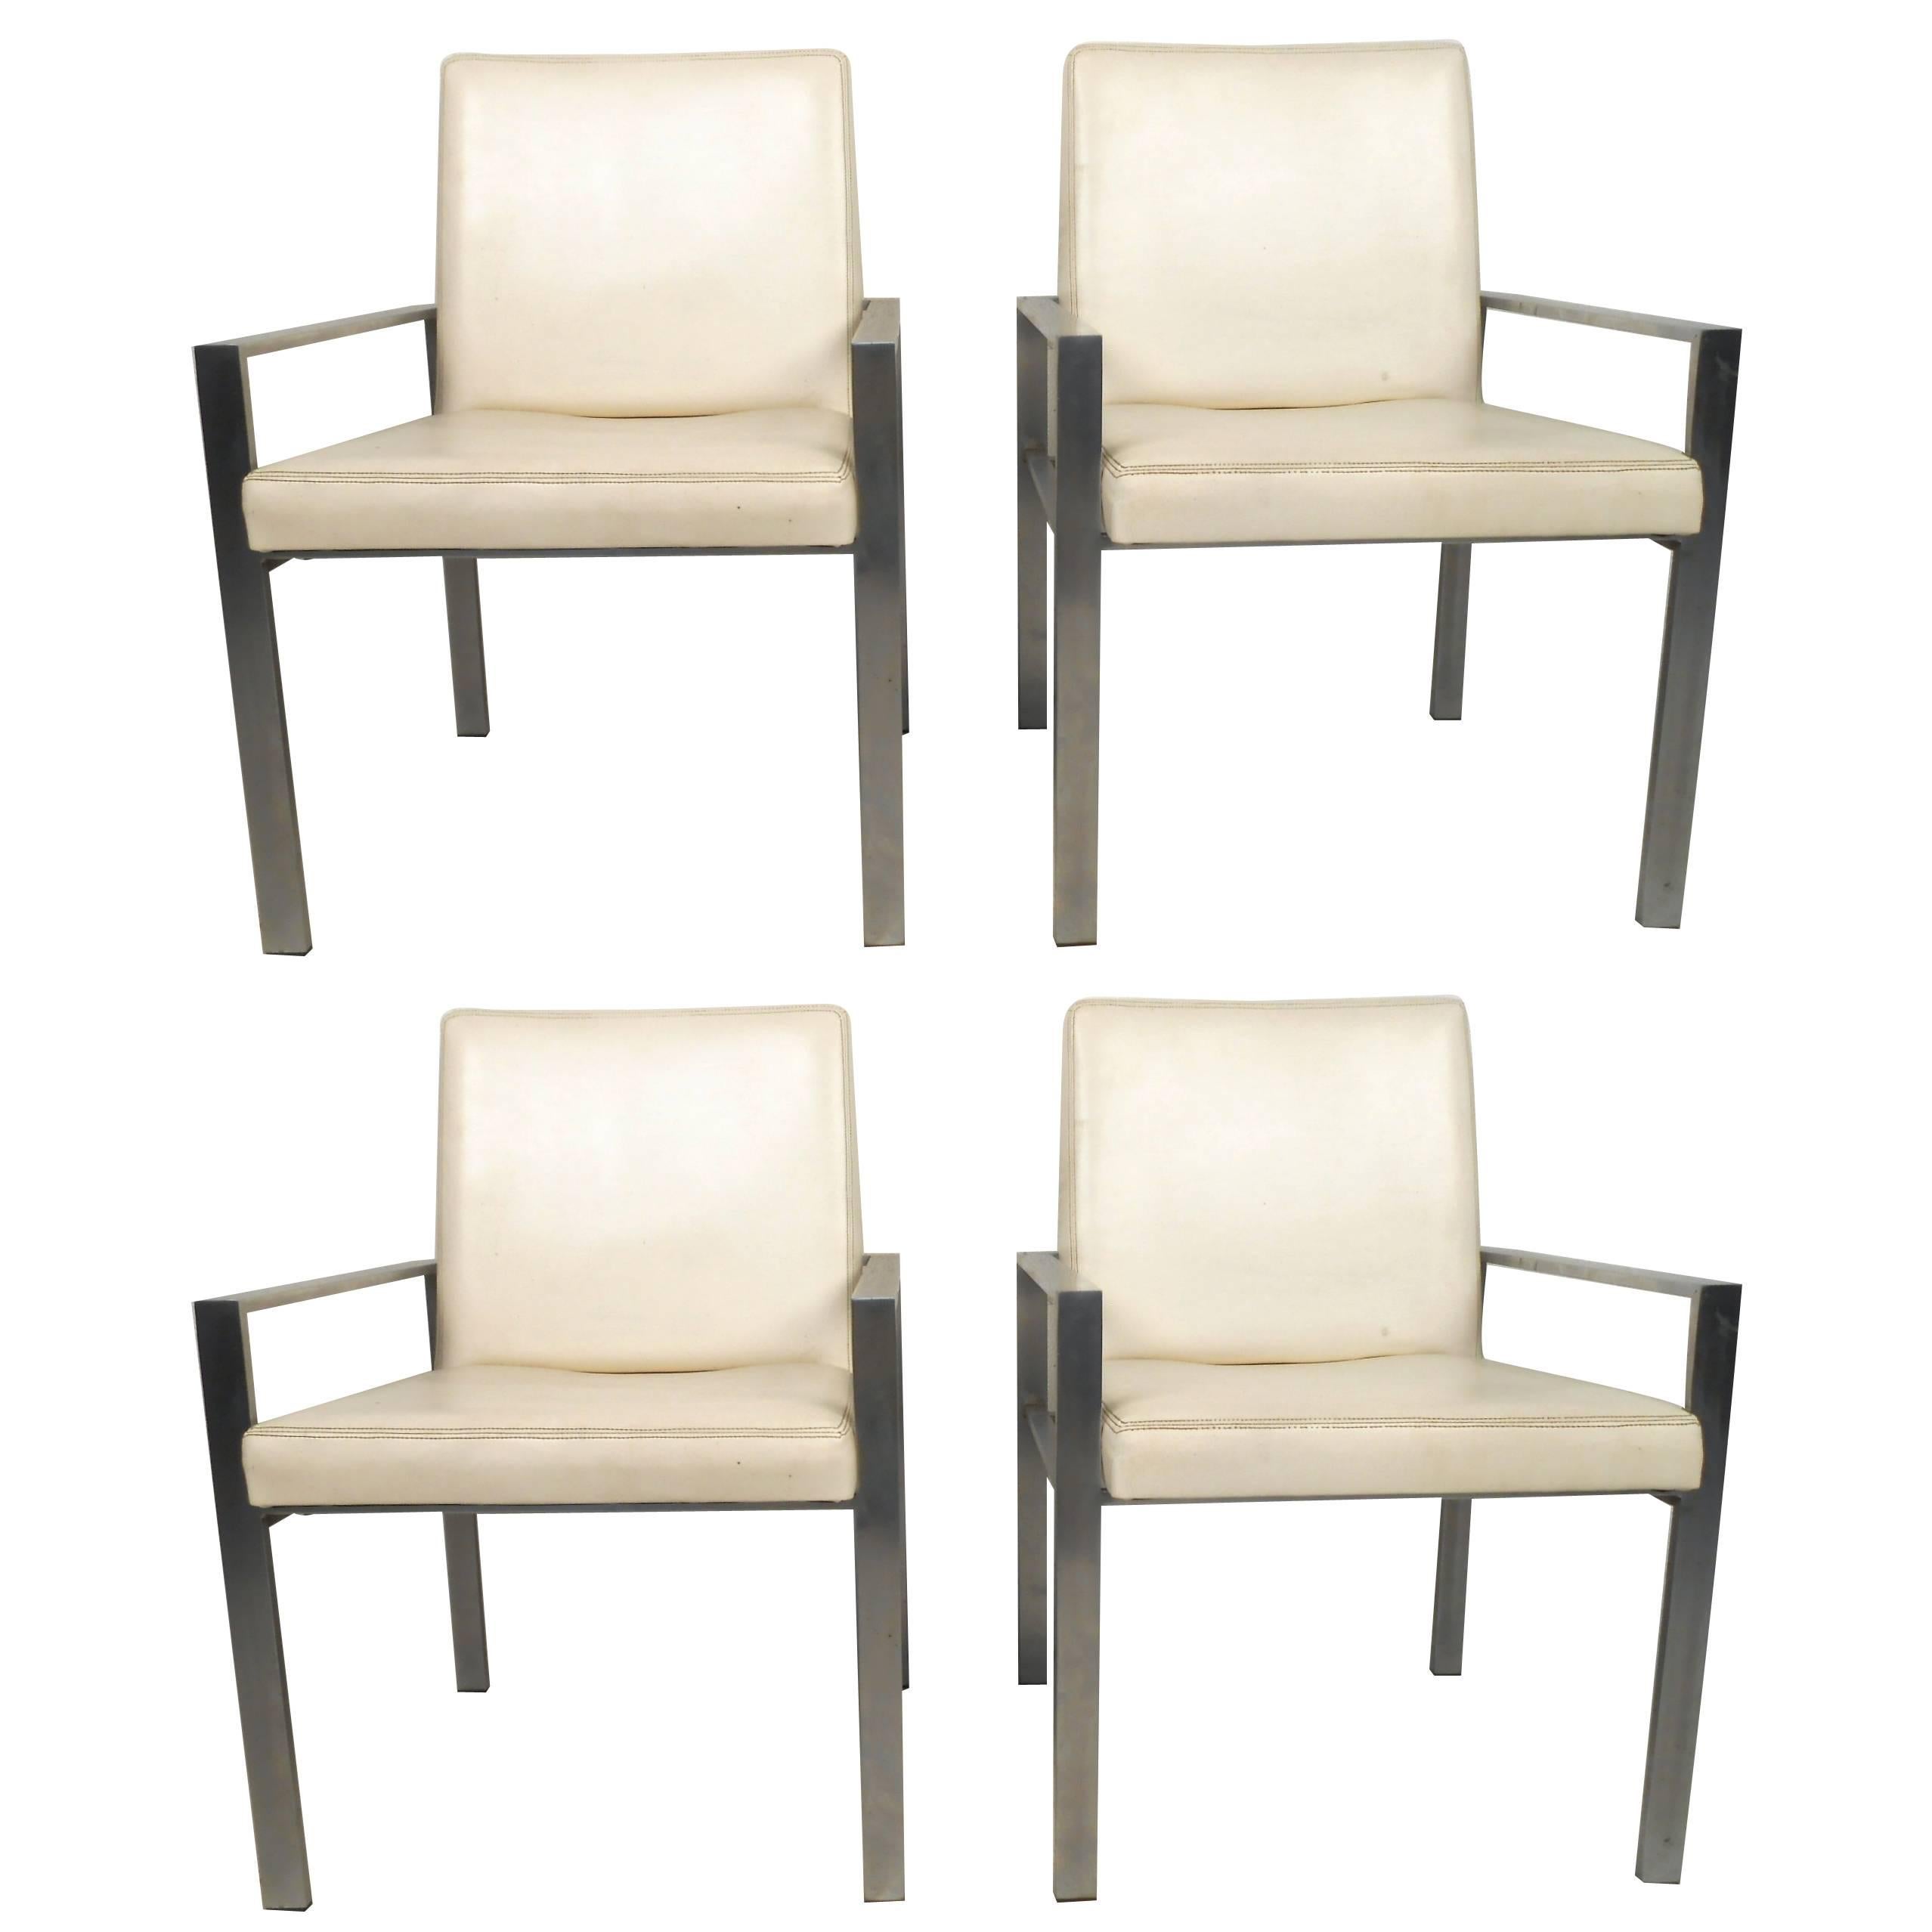 Midcentury Aluminum Frame Dining Chairs For Sale